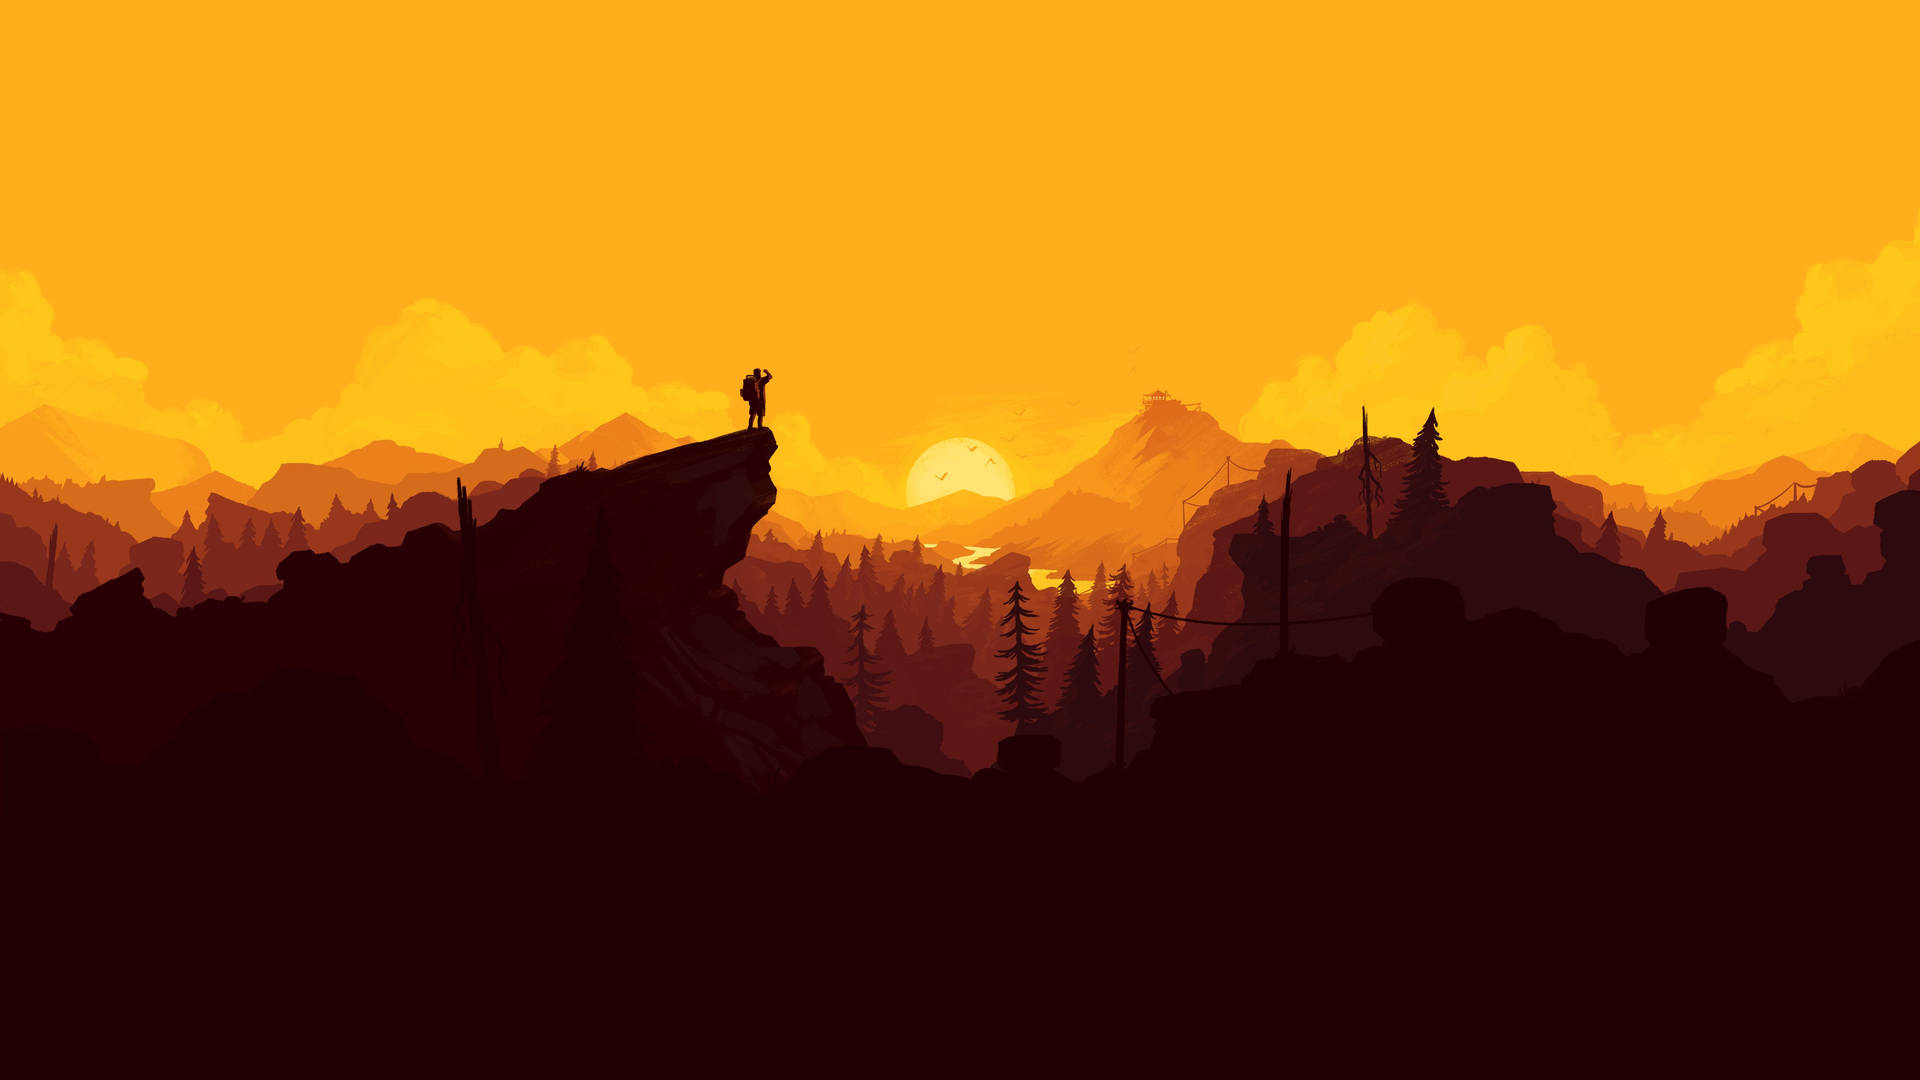 Henry exploring the beauty of nature in the beautiful game Firewatch Wallpaper